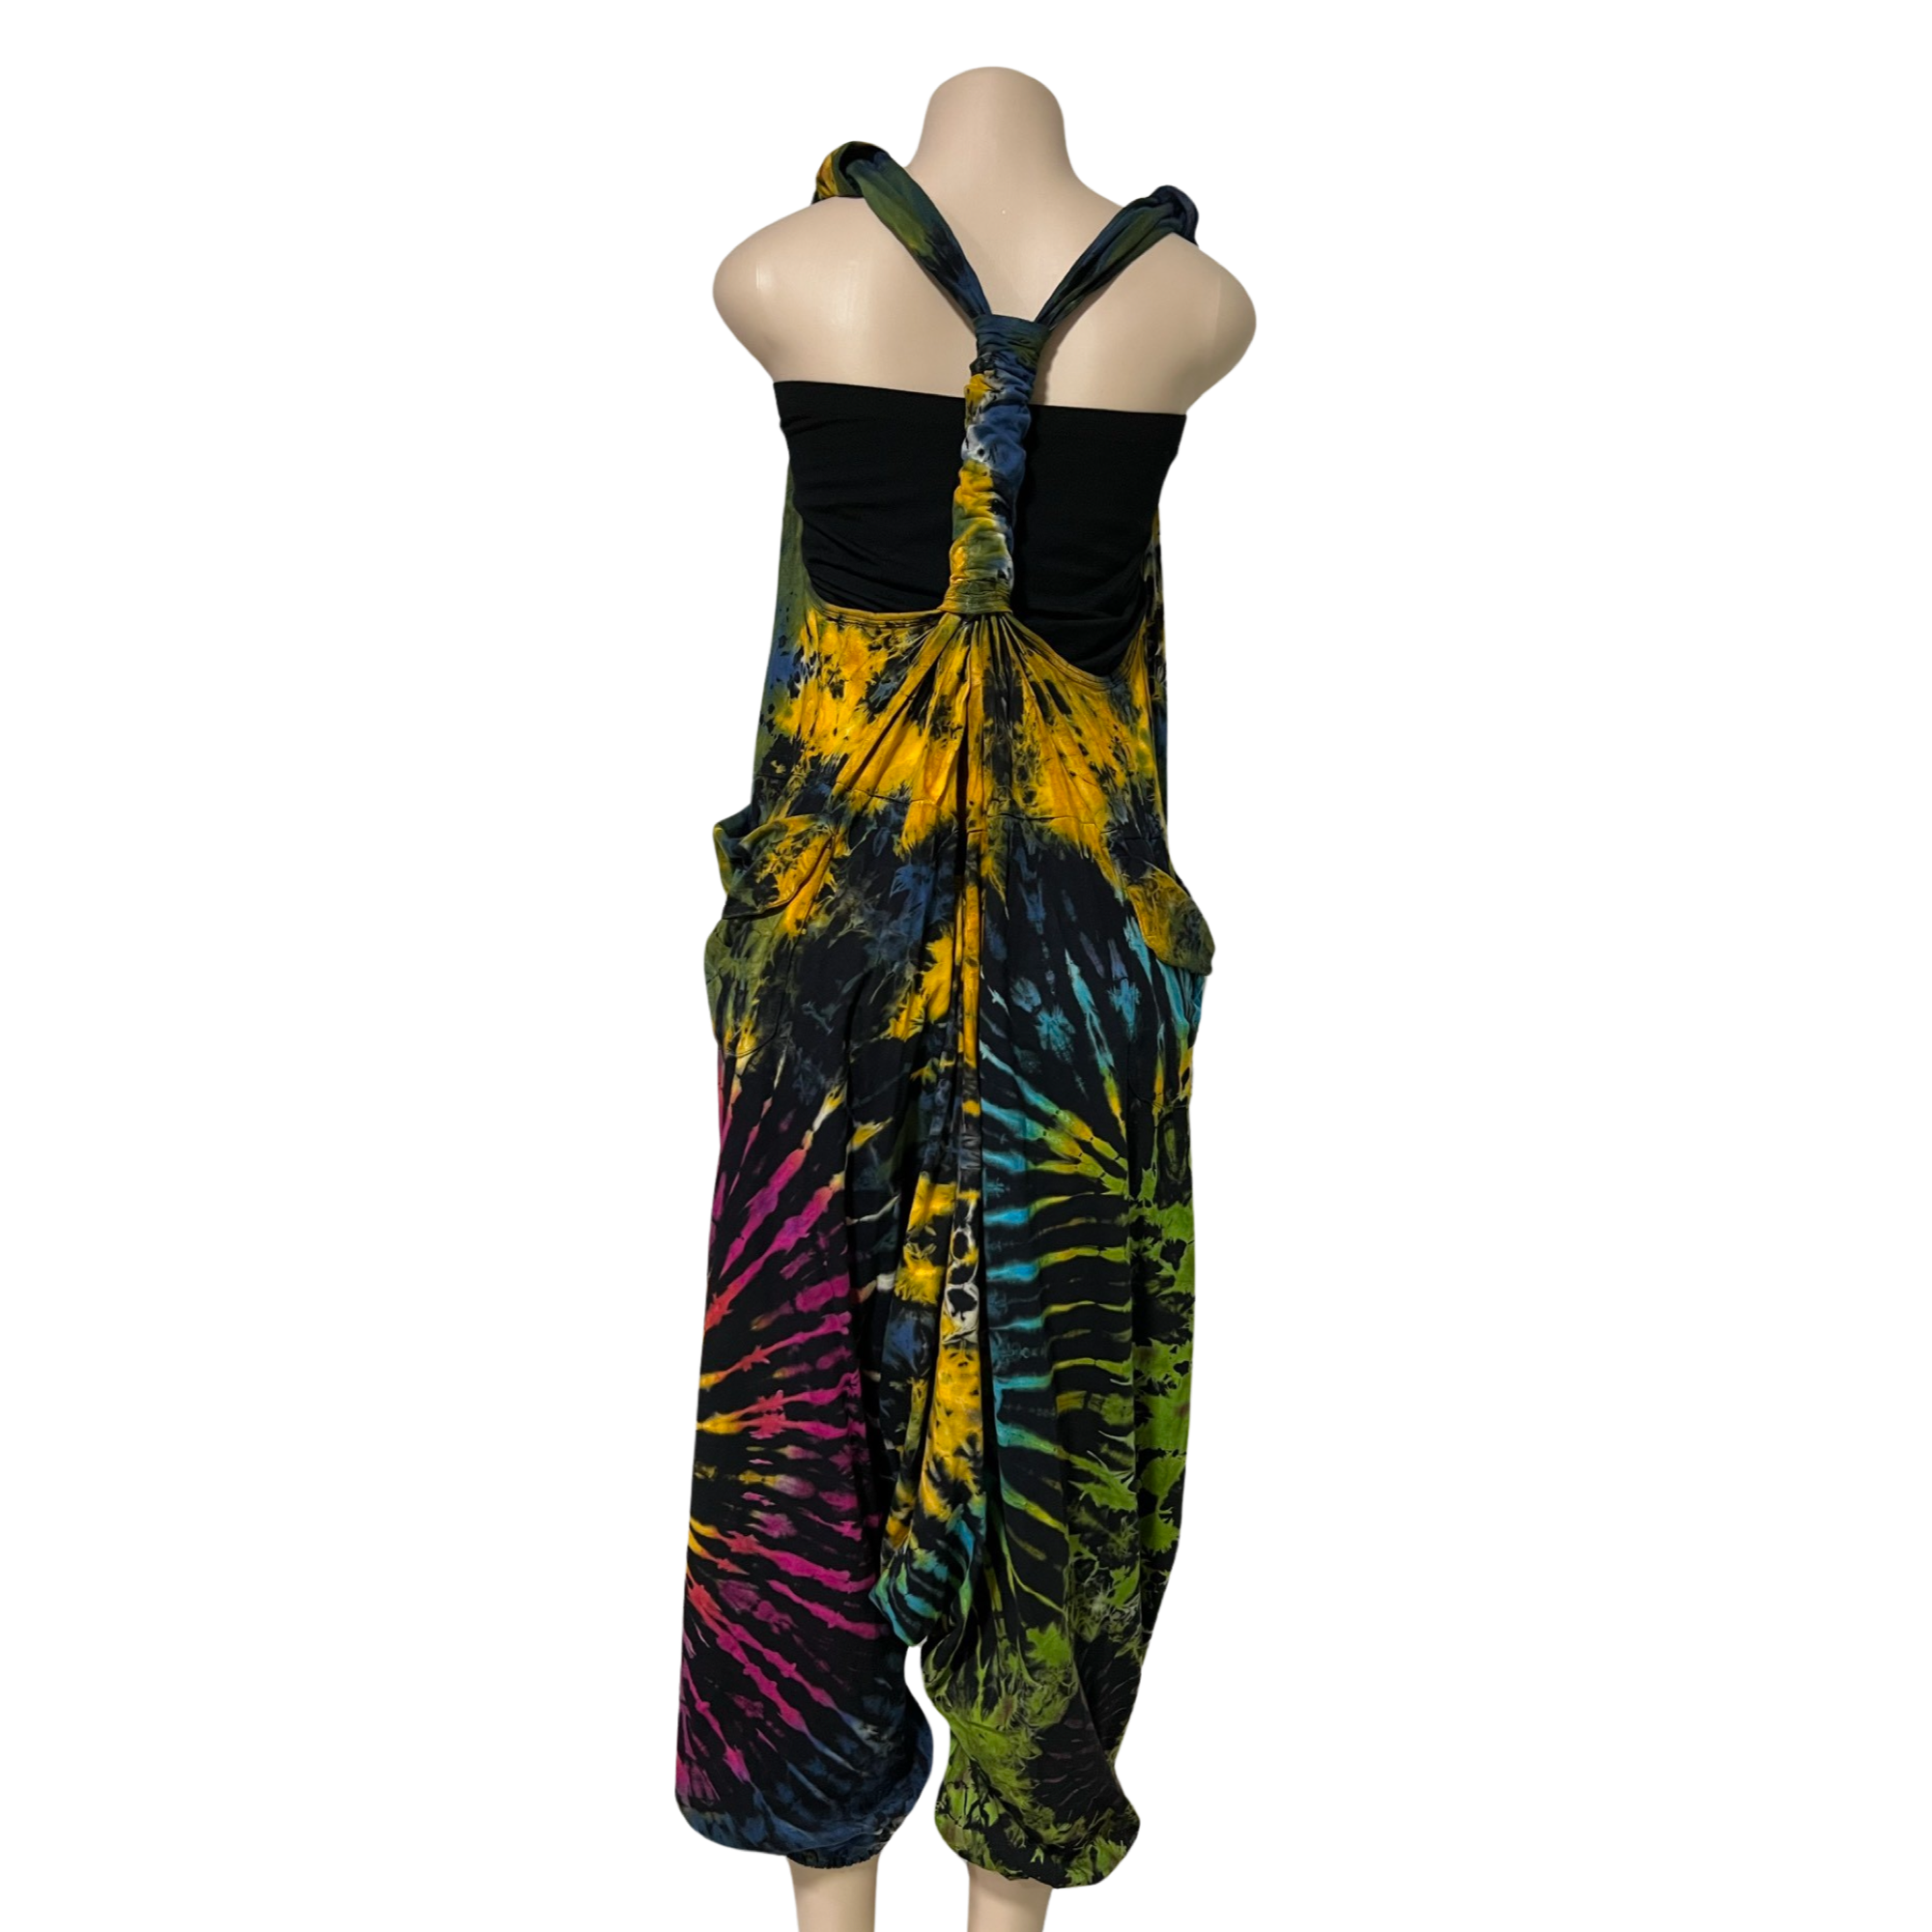 Harem Jumpsuit for Women Retro Tie Dye Loose Sleeveless V Neck Baggy Overalls One Piece Romper Jumpsuits with Pockets, Assorted Colors.